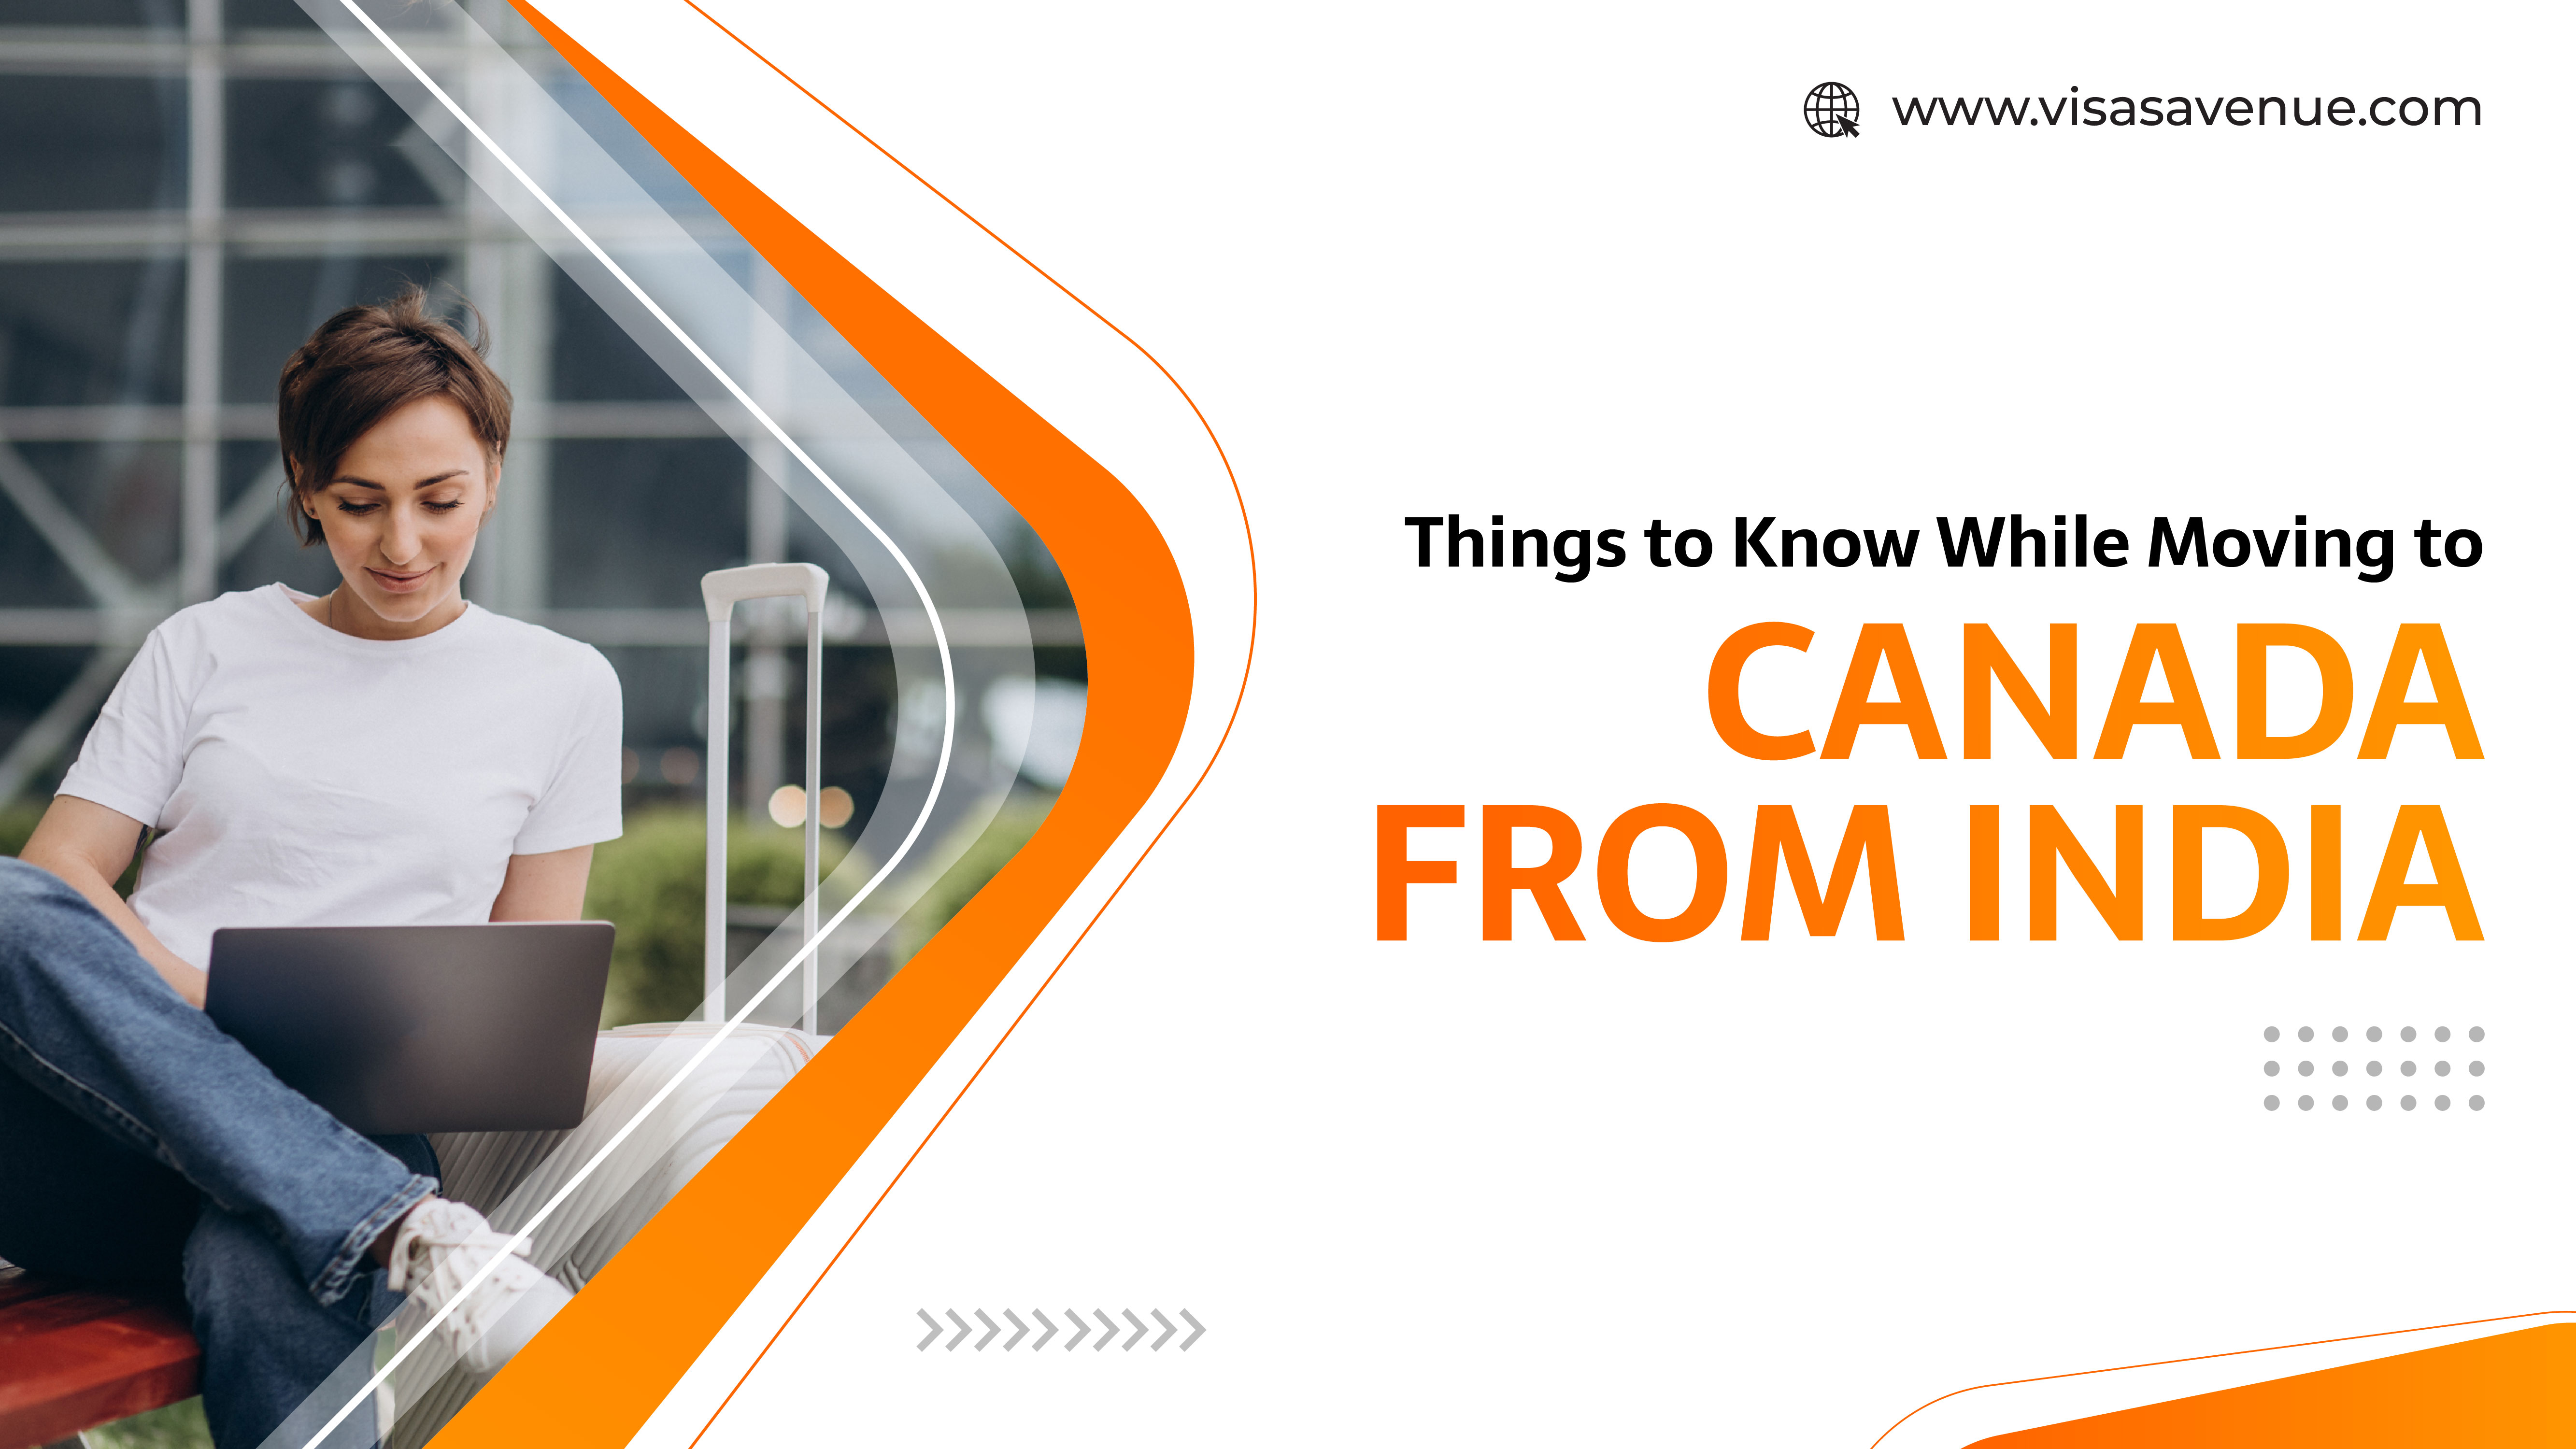 Things to Know While Moving to Canada from India